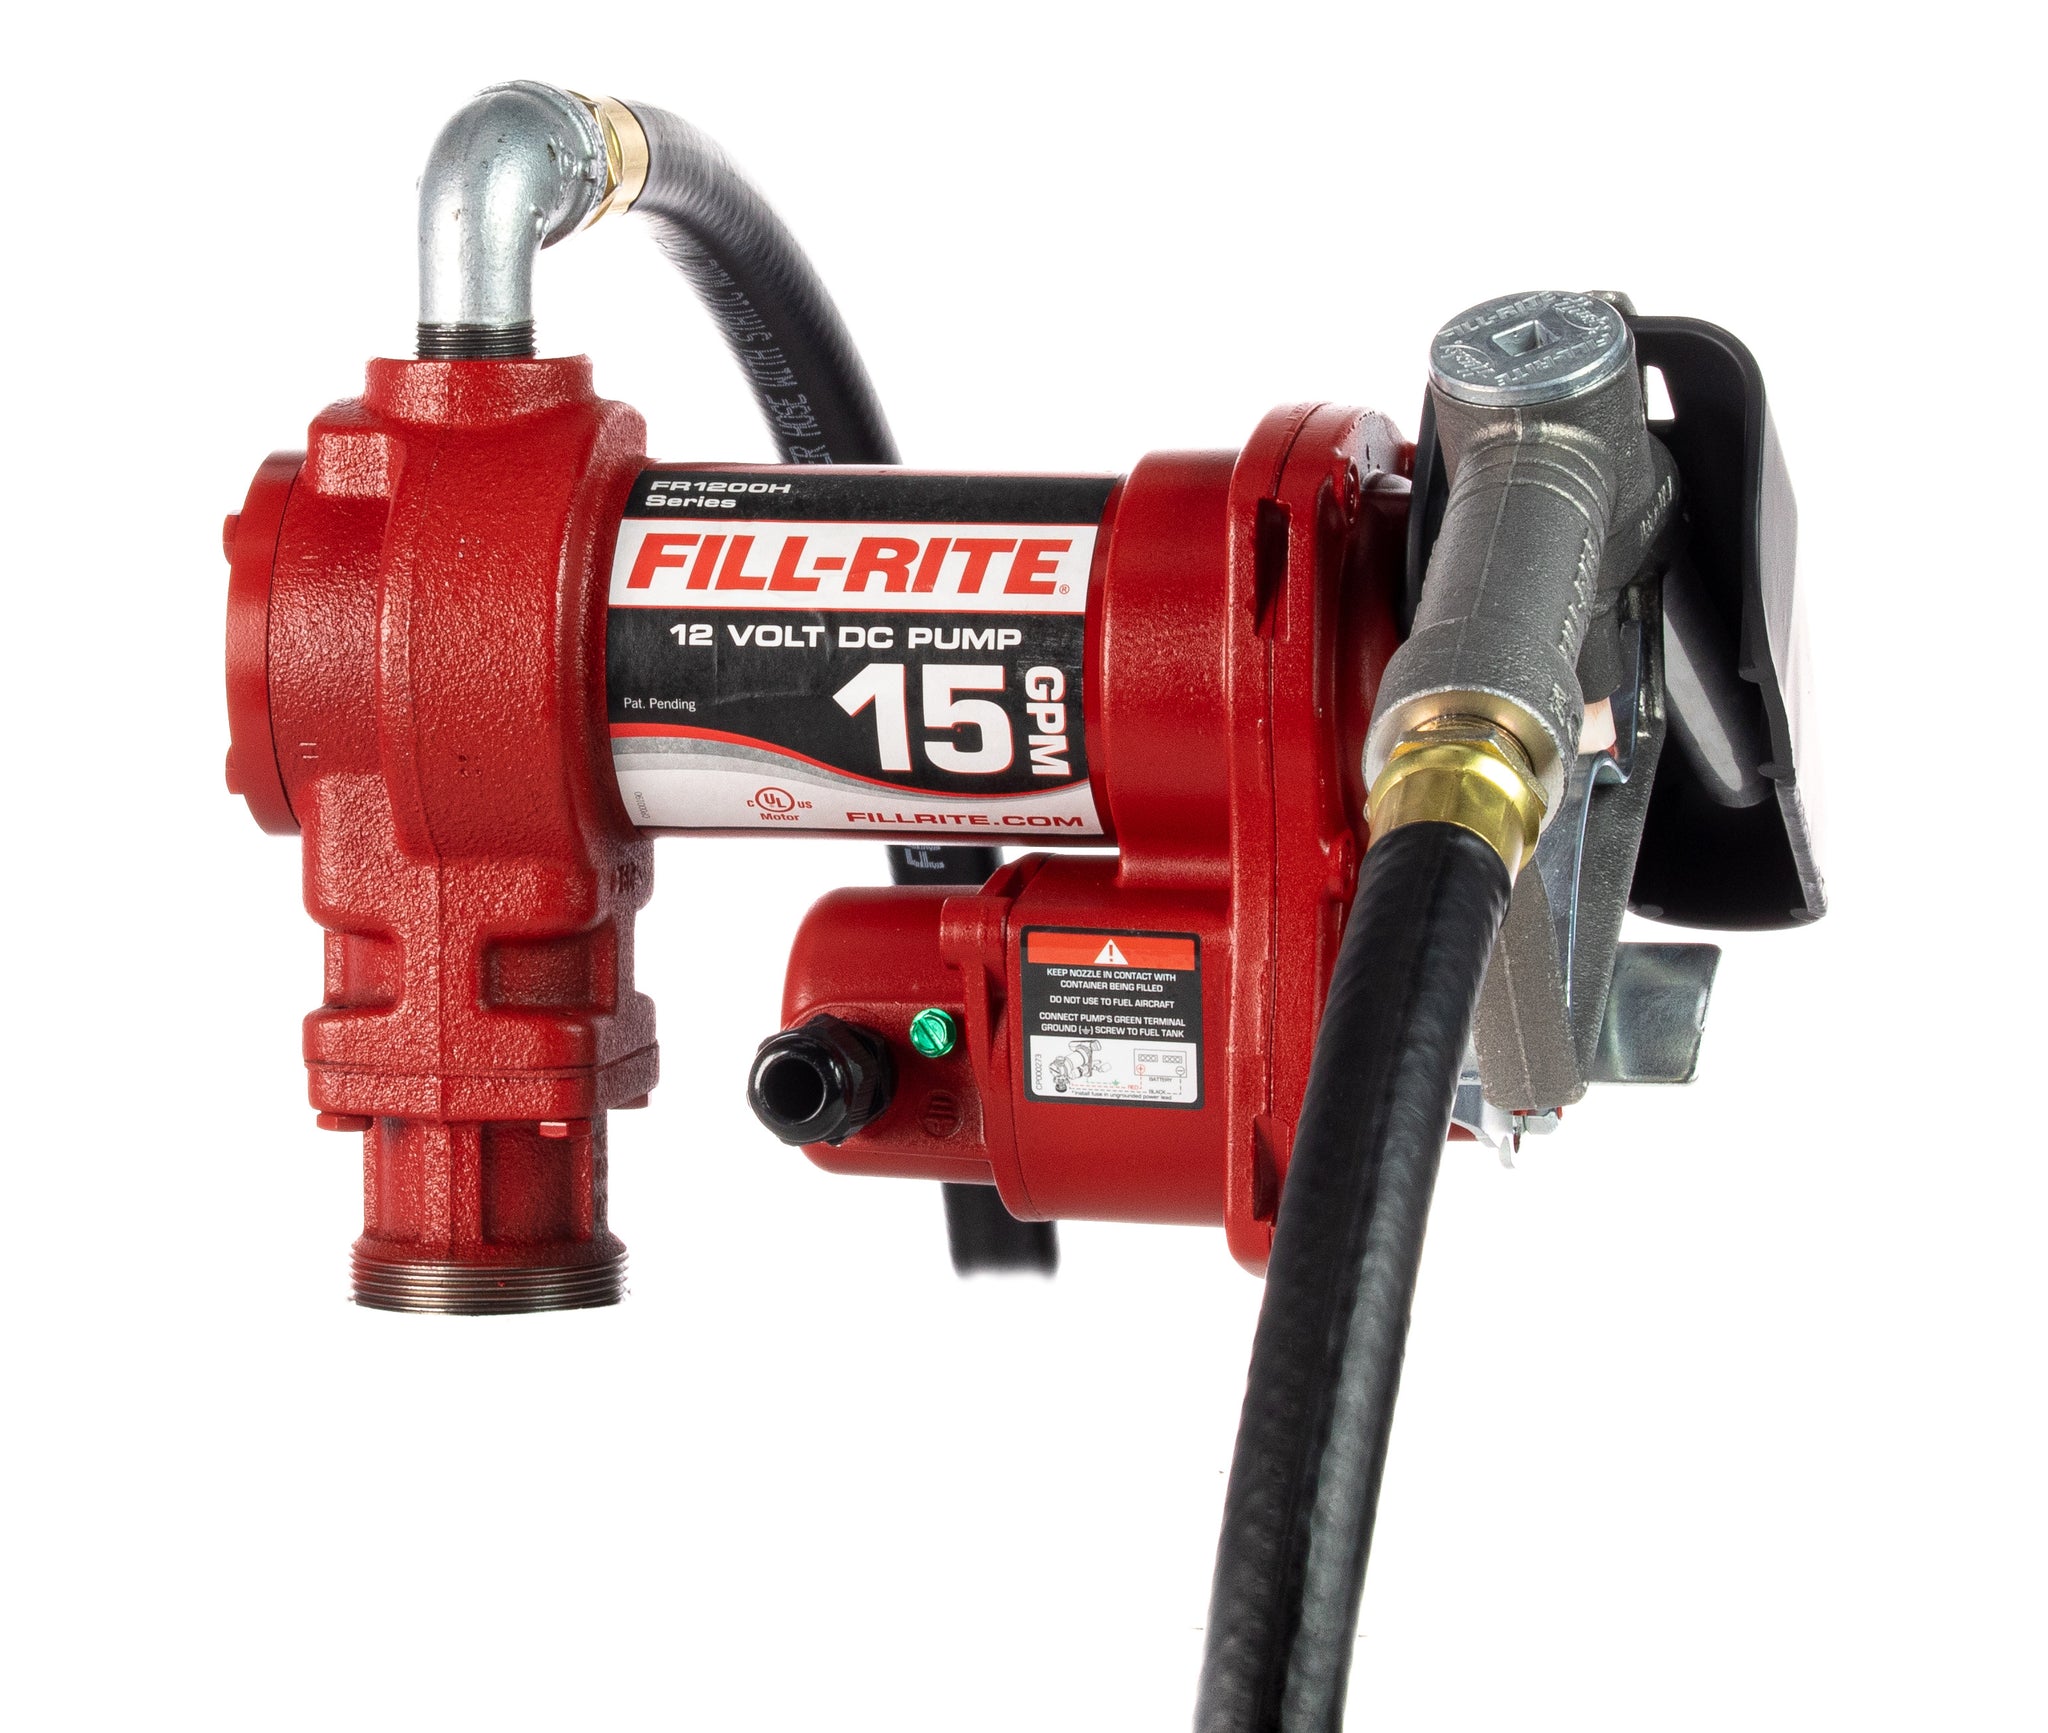 Fill-Rite 12V DC Fuel Transfer Pump Kit — 15 GPM, 3/4in. Manual Nozzle,  3/4in. x 12ft. Hose, Model# FR1210H